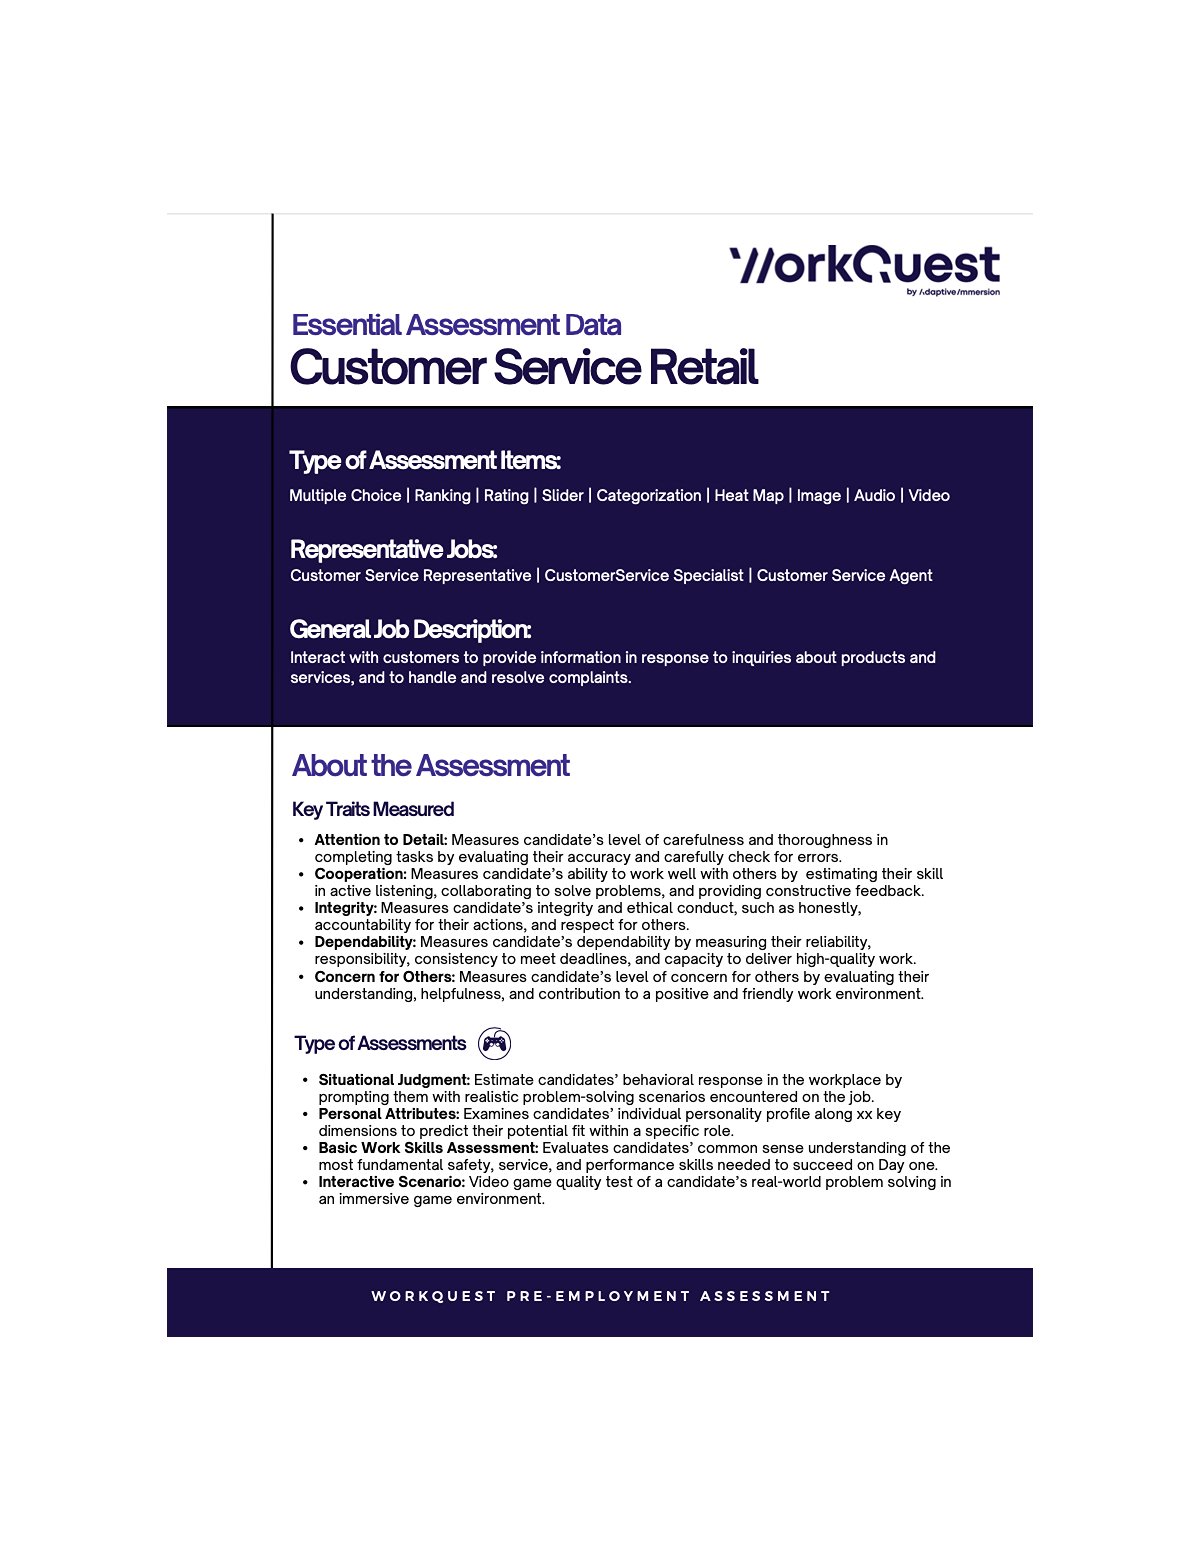 Customer Service Retail Industry Assessment